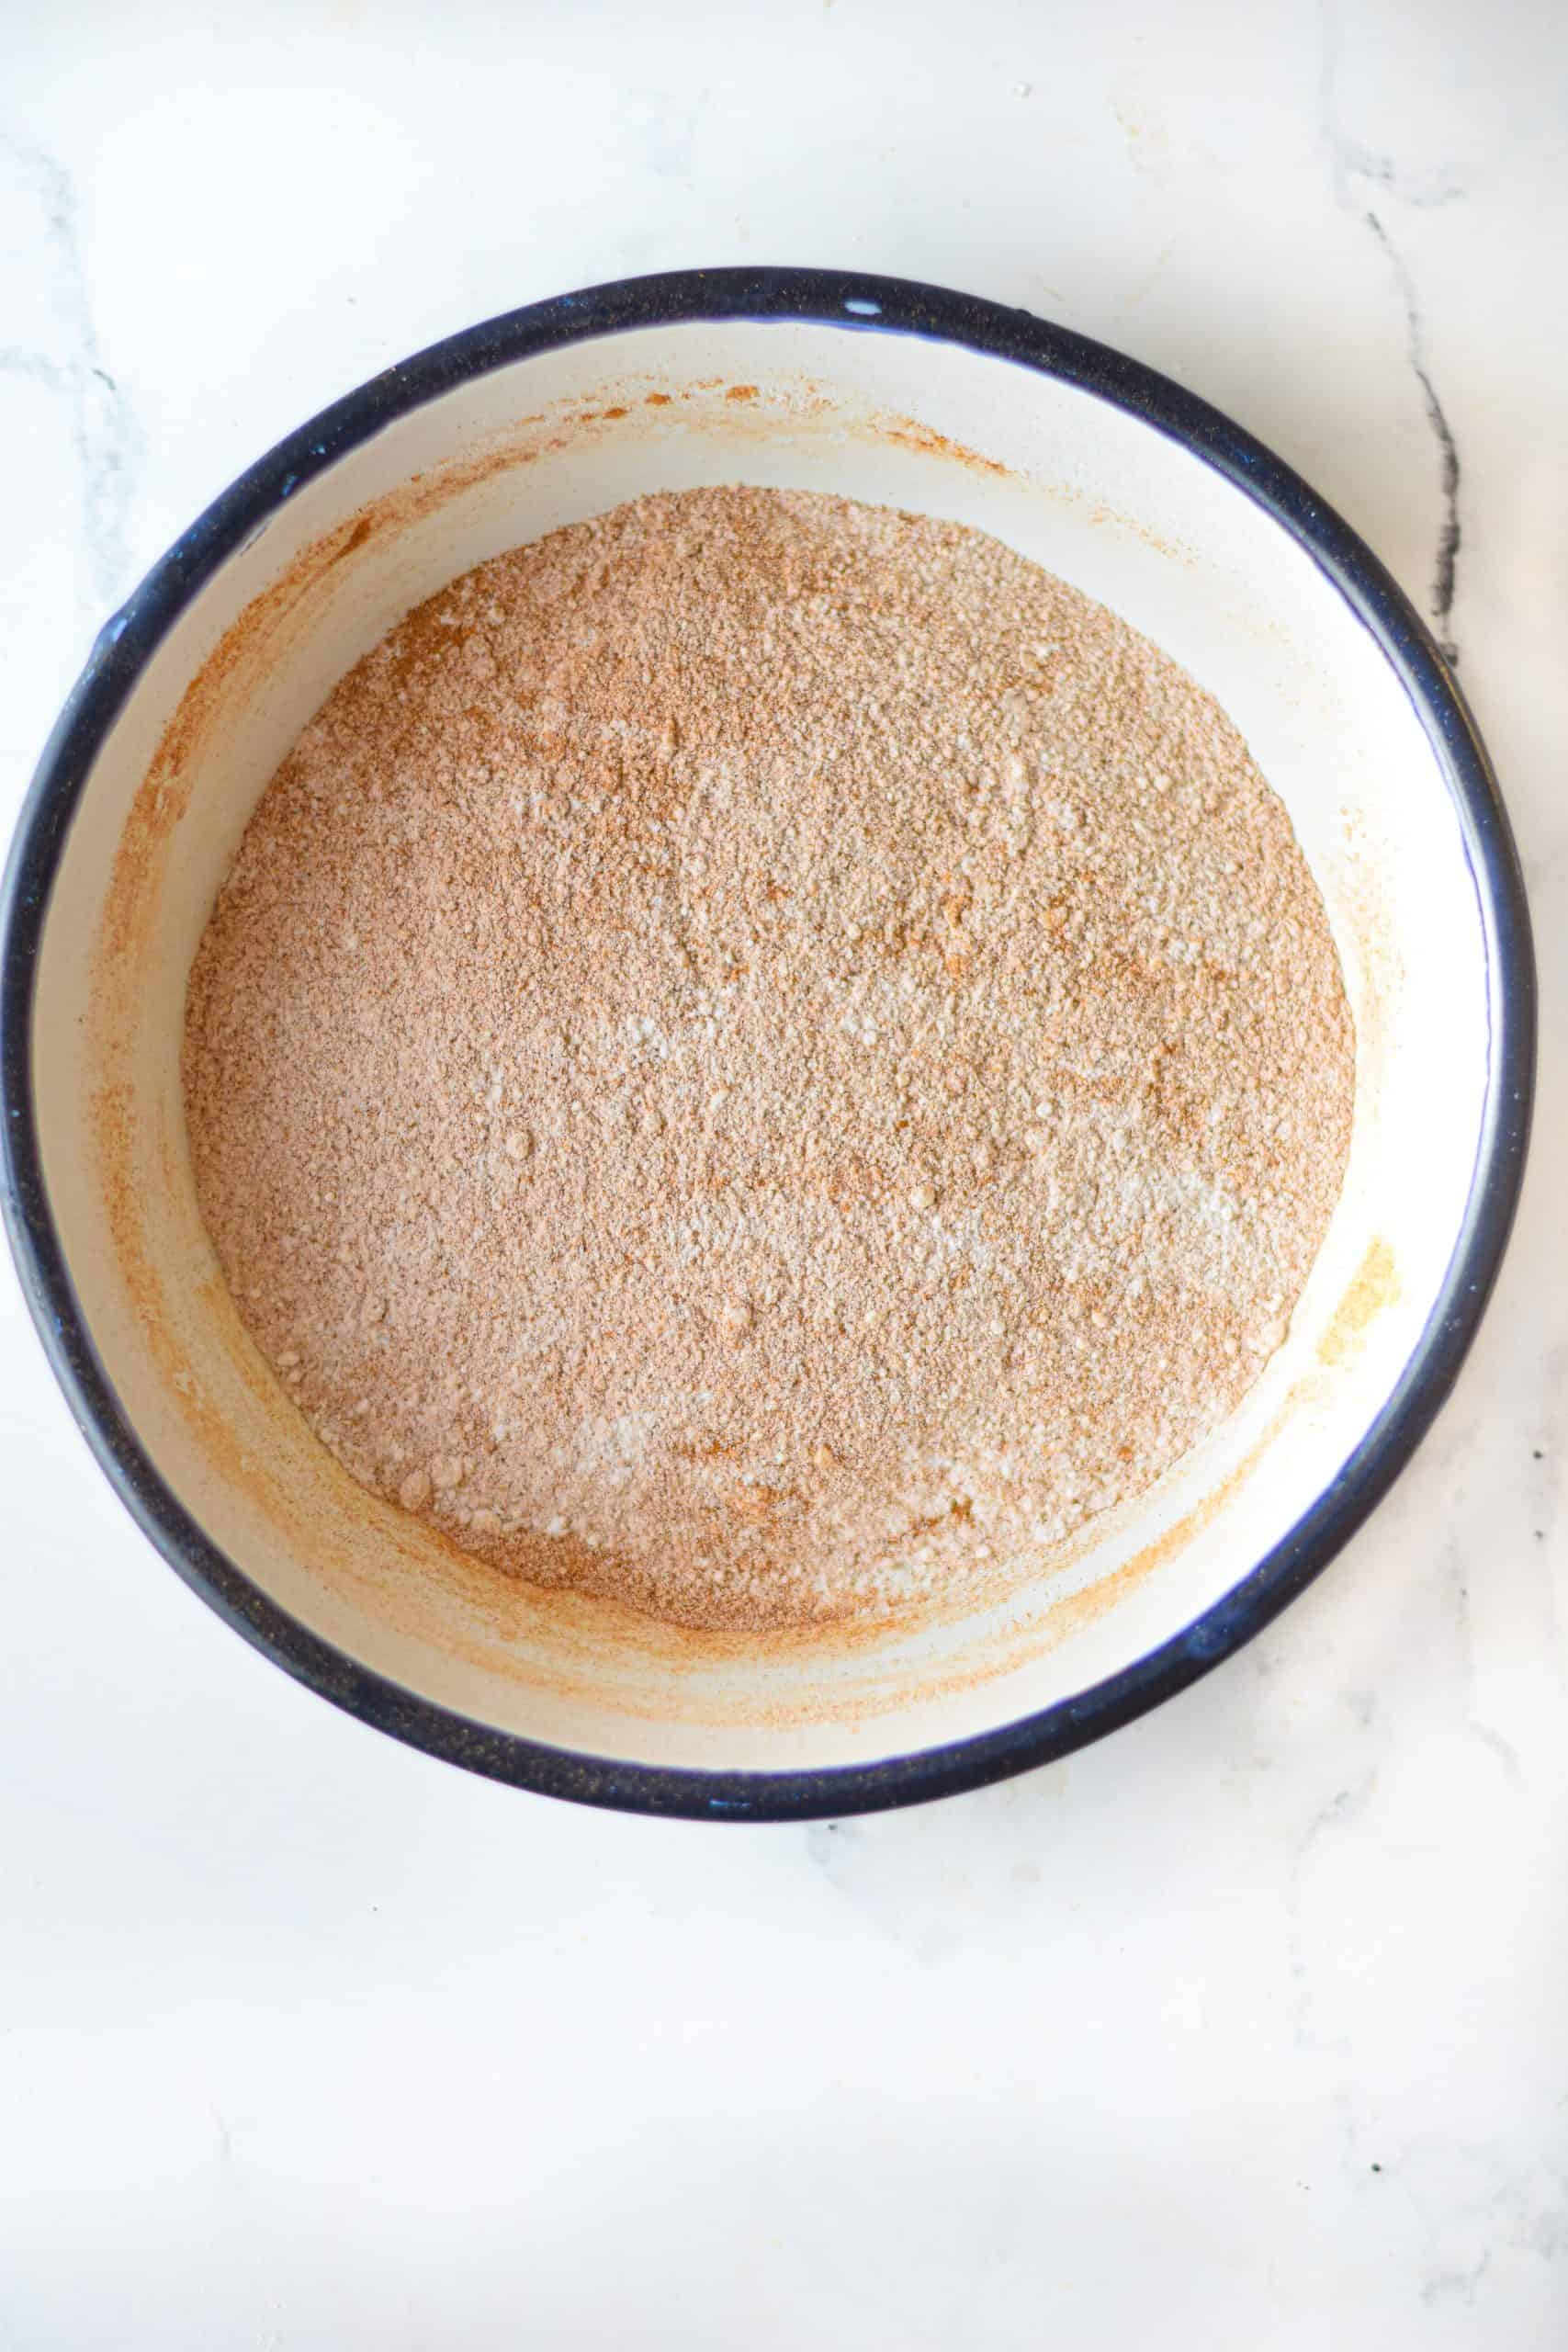 cinnamon and sugar mixed together in a white shallow bowl.